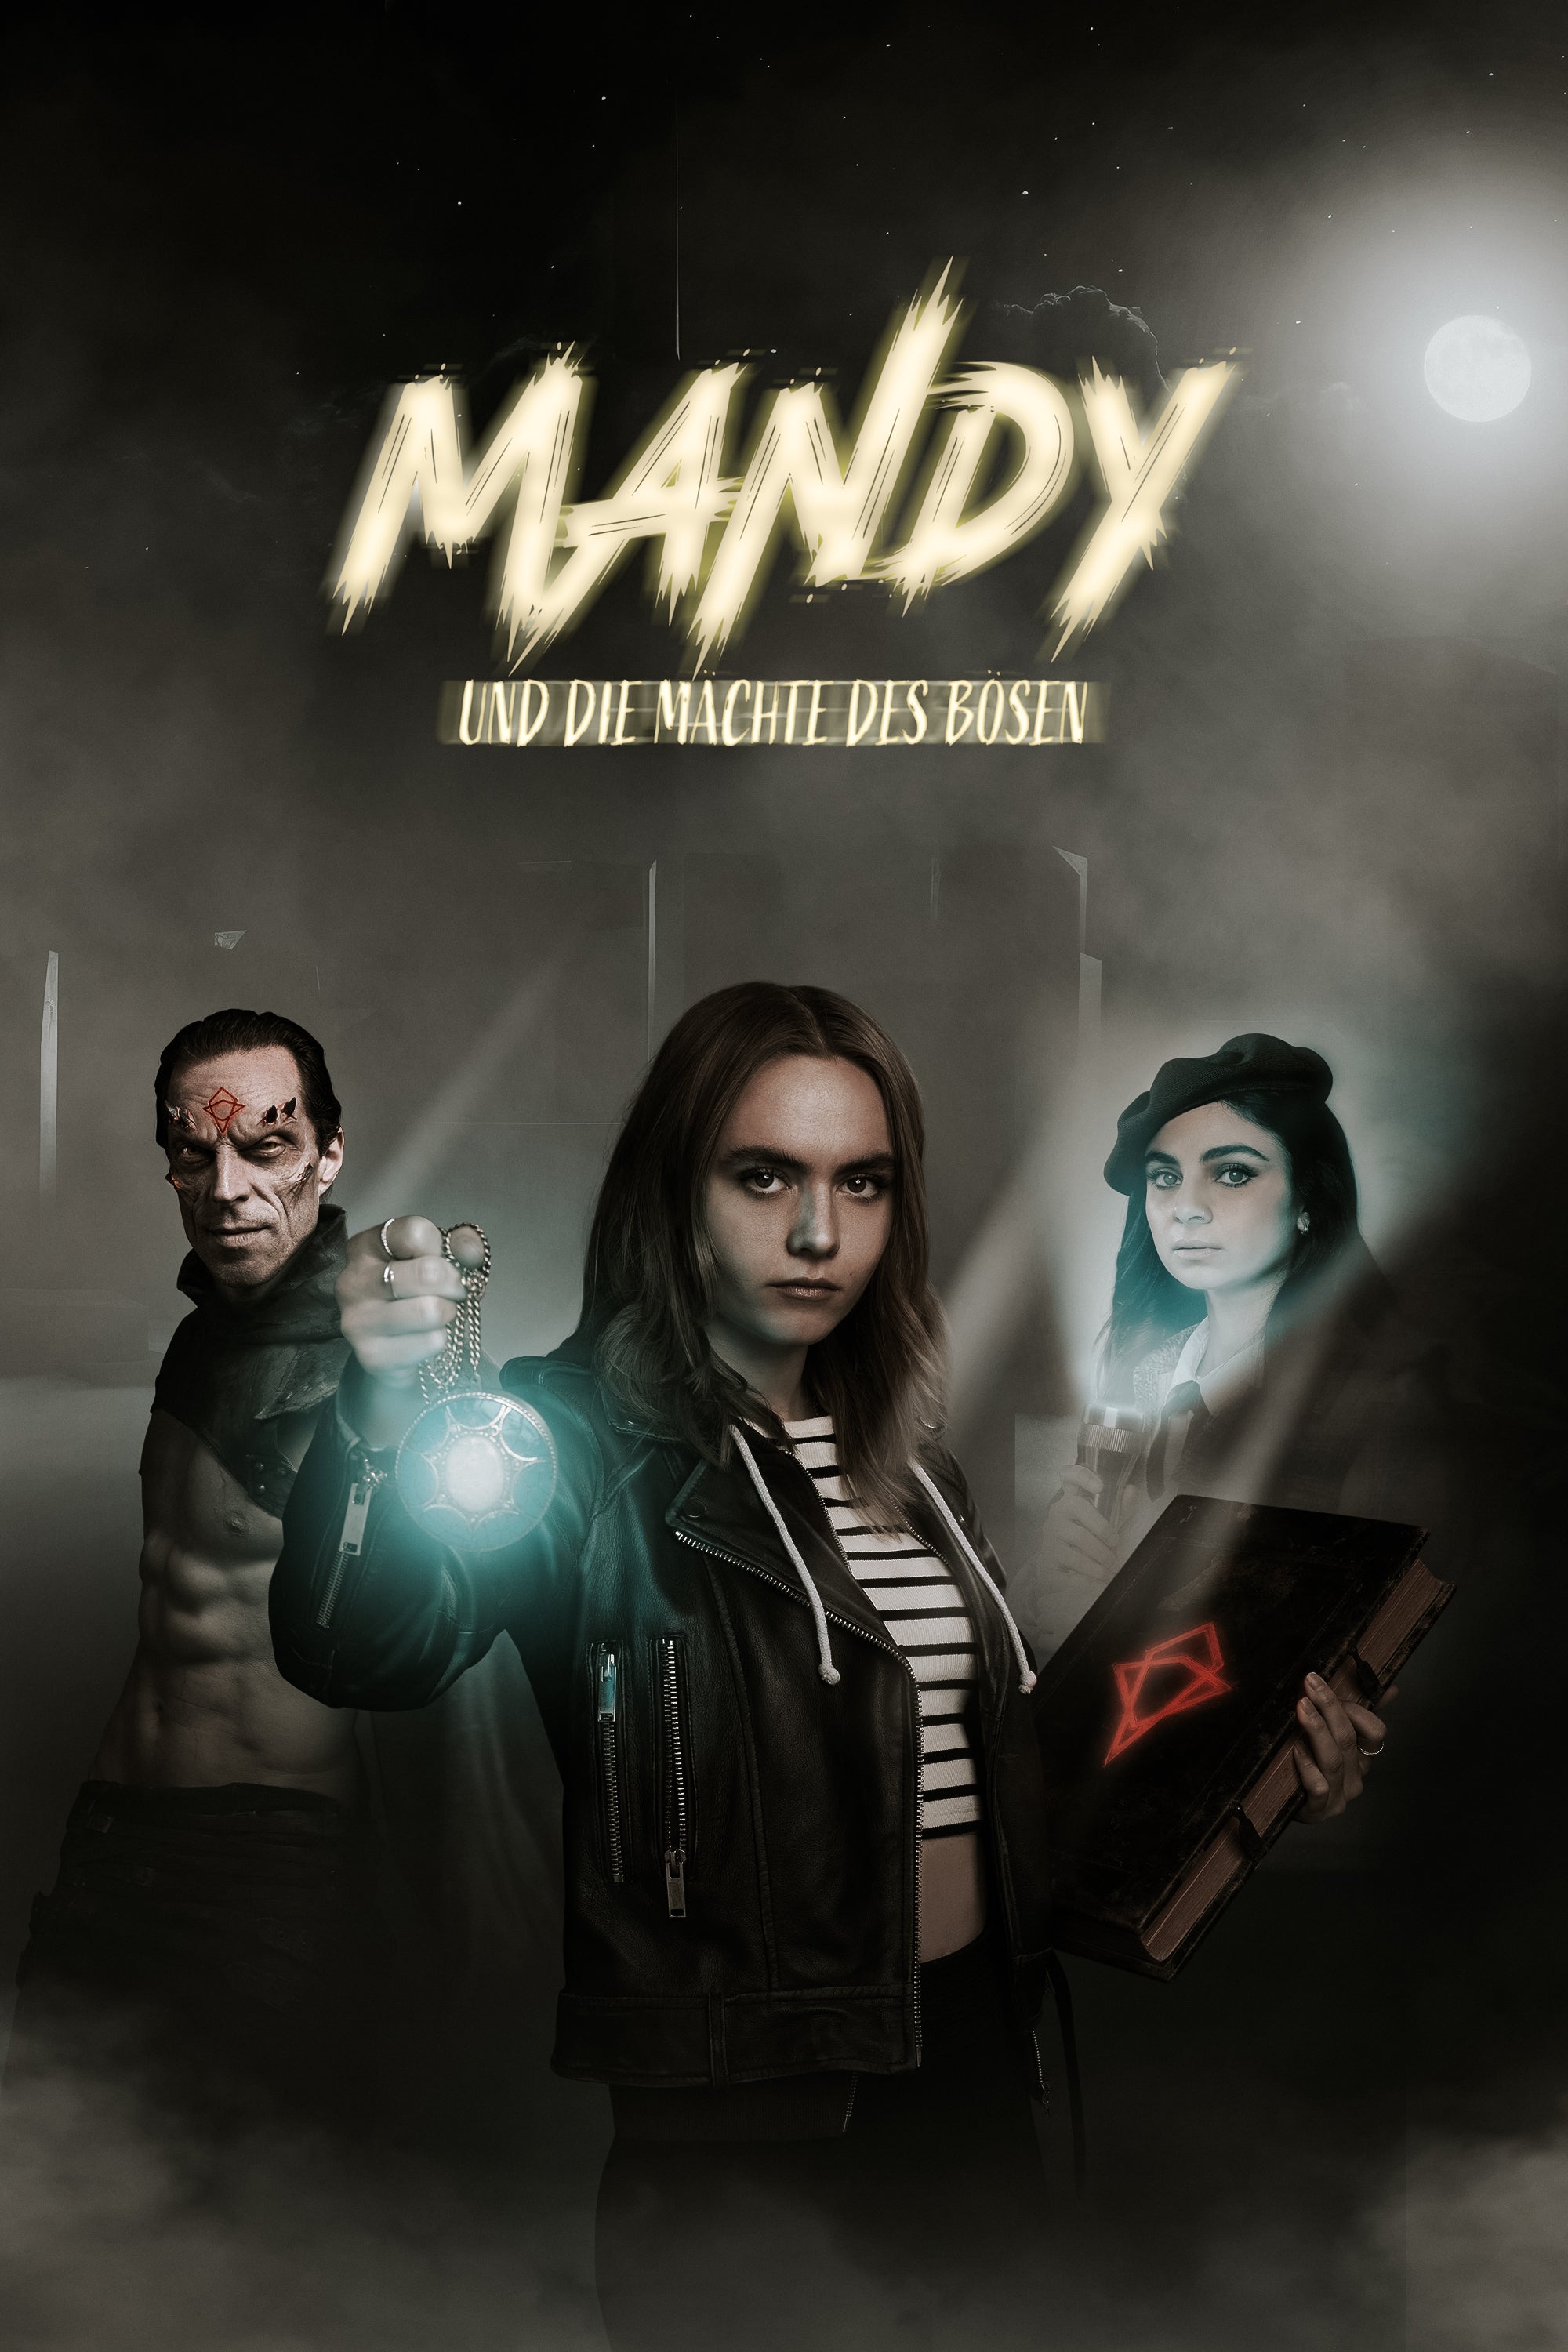 TV ratings for Mandy And The Forces Of Evil (Mandy Und Die Mächte Des Bösen) in South Africa. Amazon Prime Video TV series